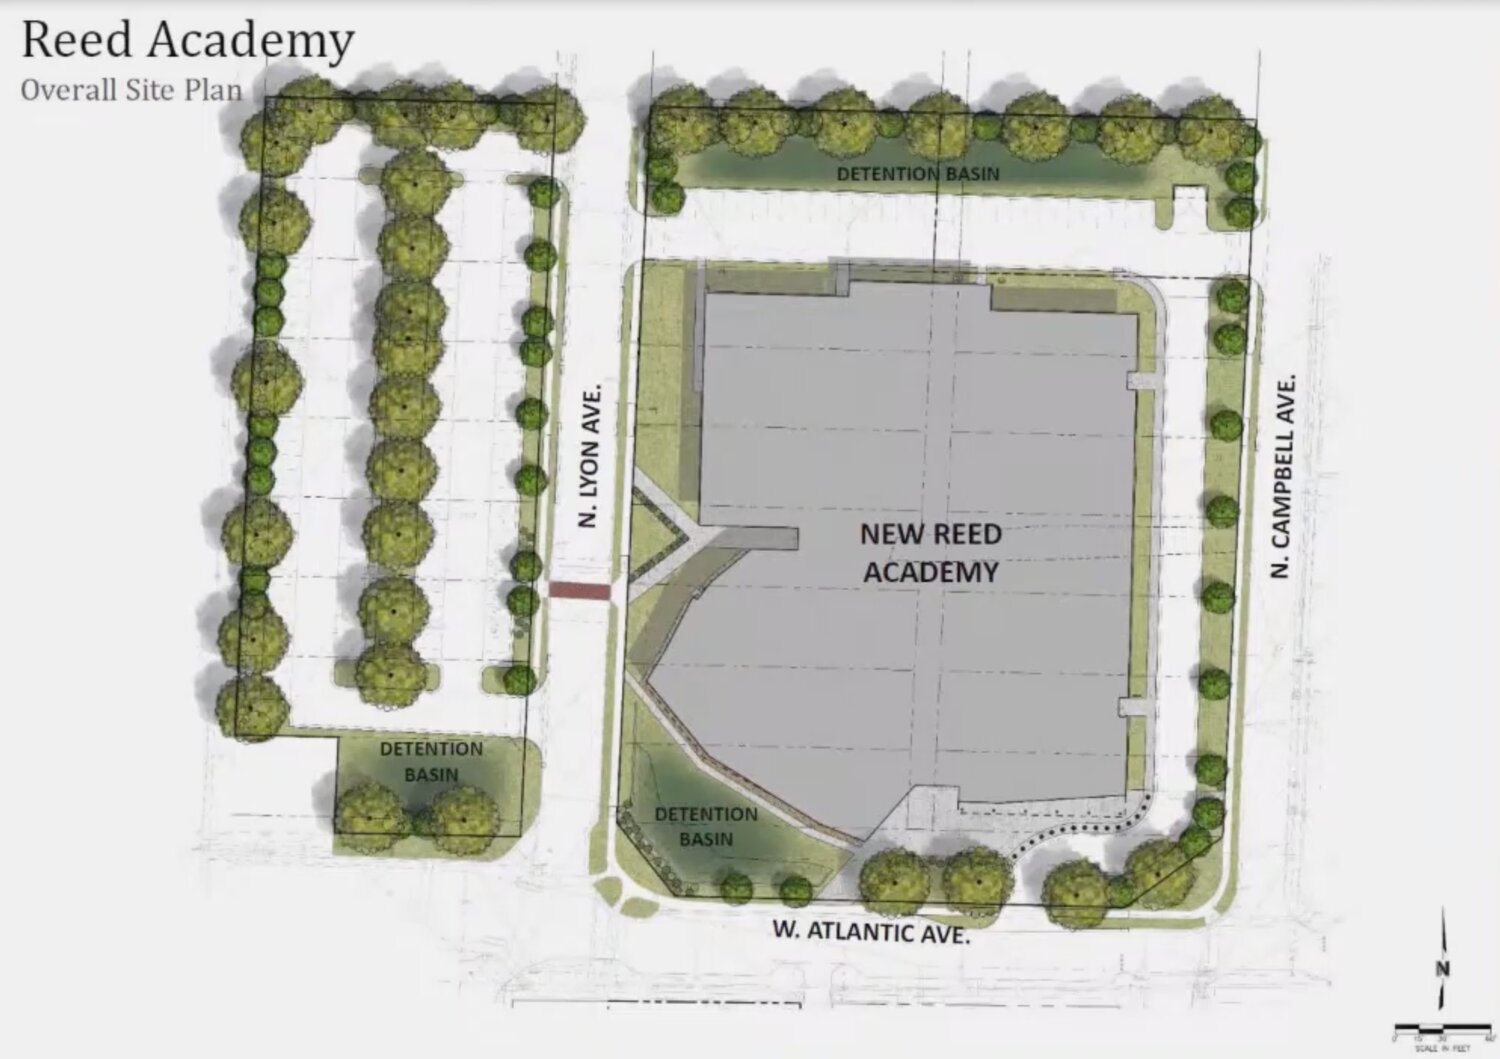 The plan for a new Reed Academy shows a compact site for the 128,900-square-foot middle school.